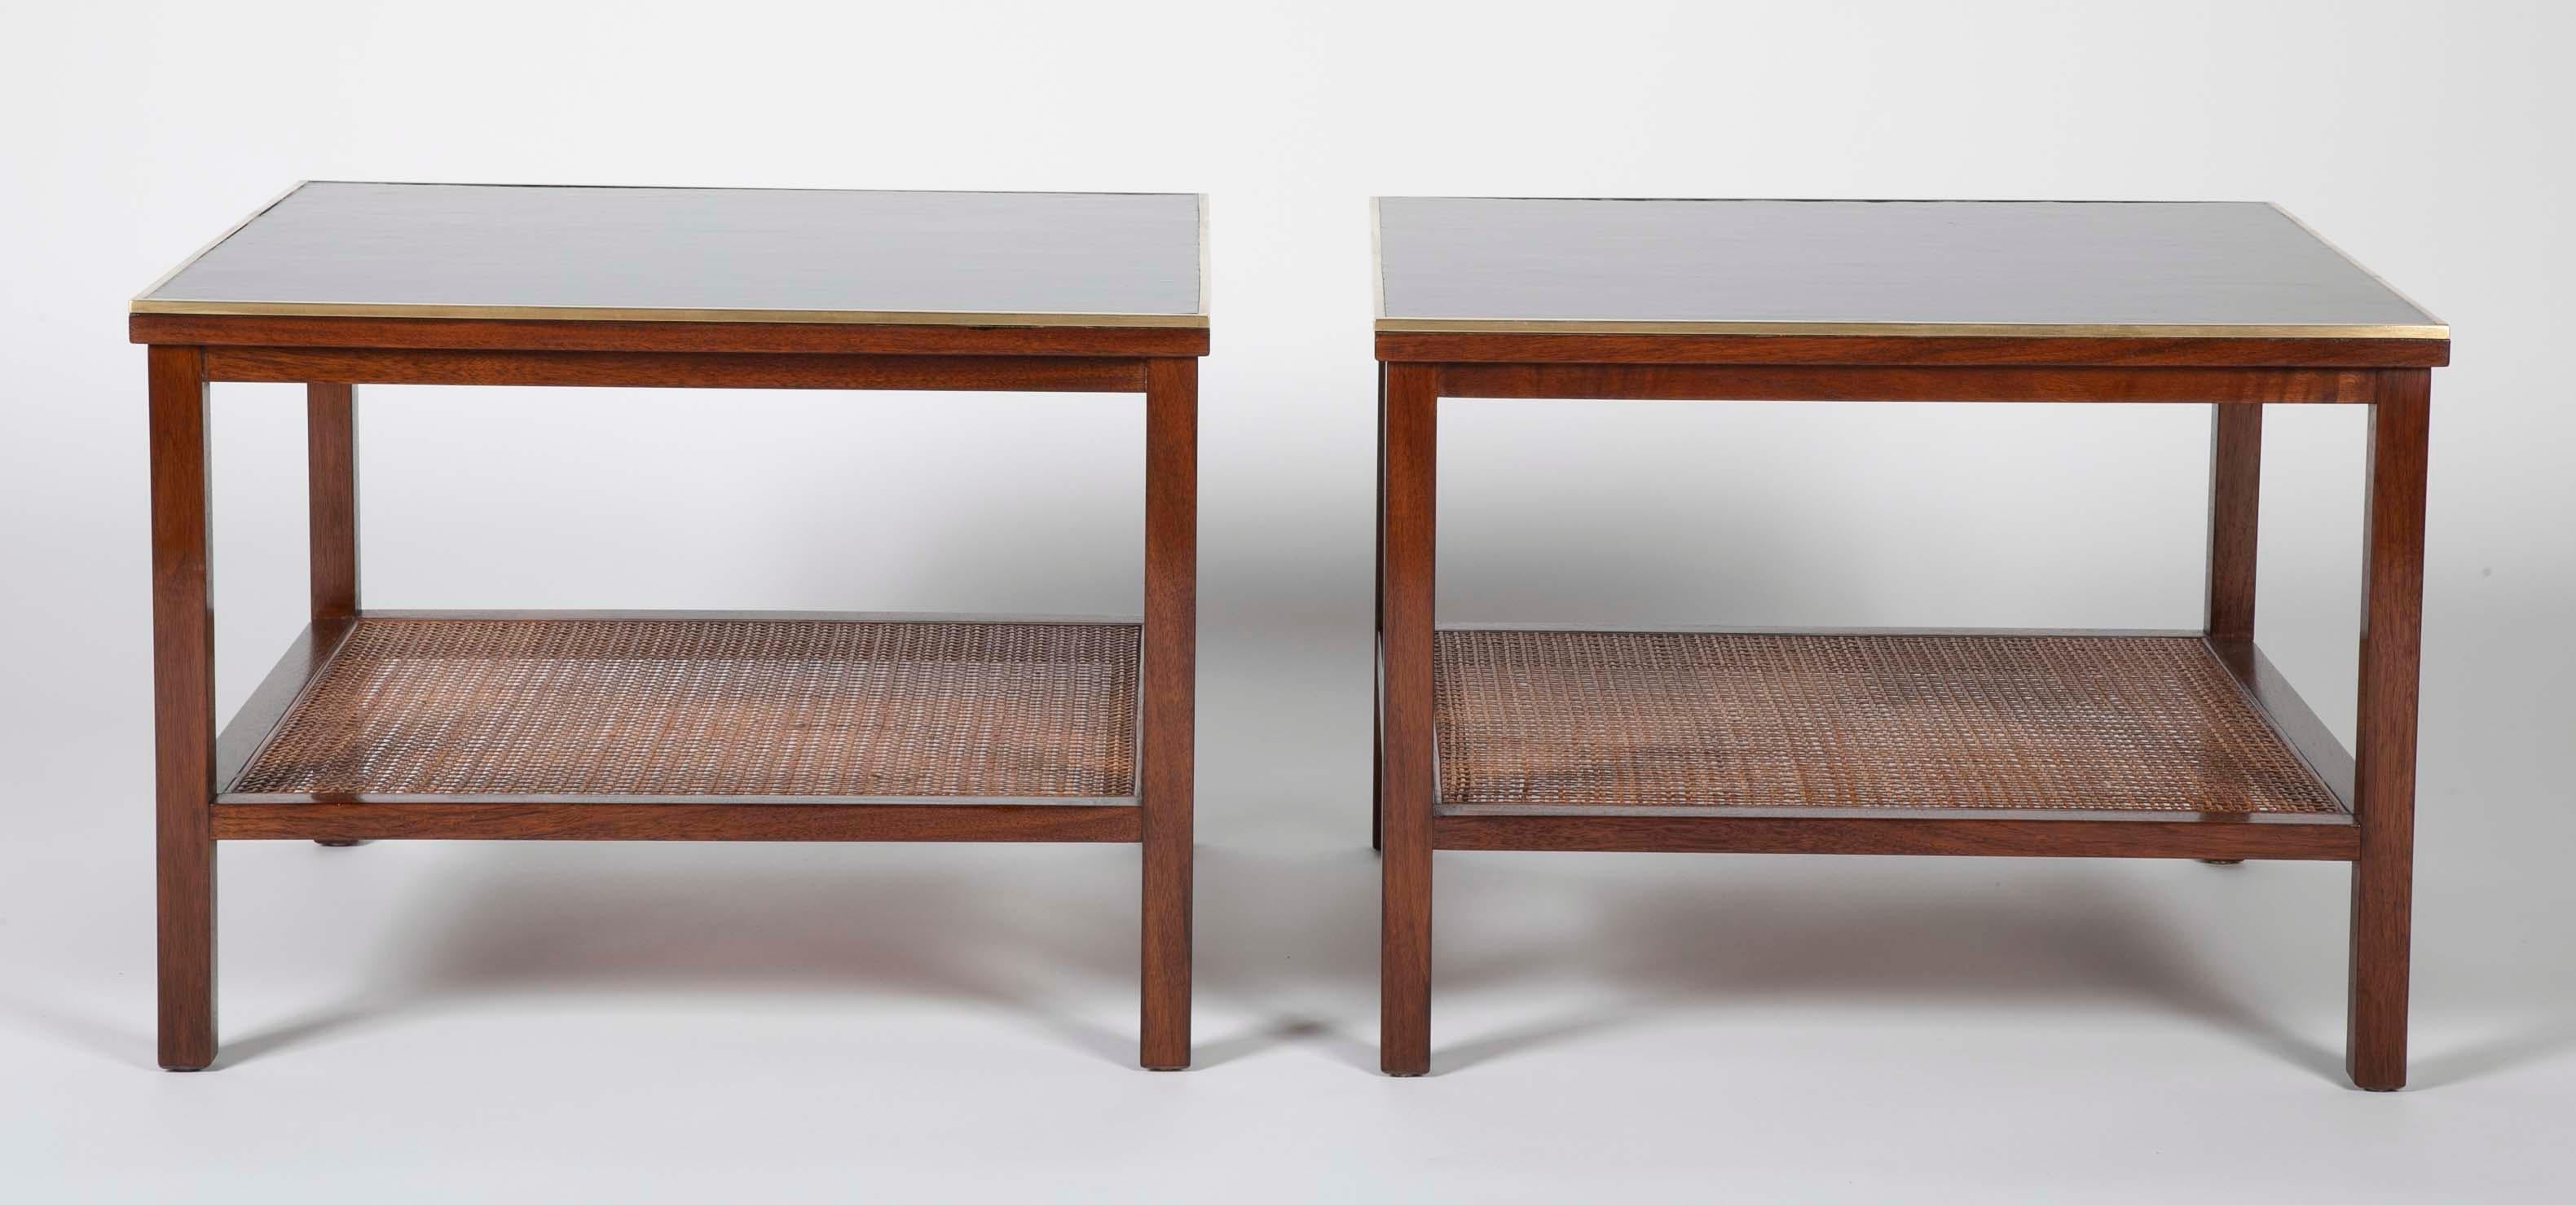 A pair of Paul McCobb Side tables in Walnut with caned shelves. The tops are black leather bound inside a brass boarder. Both tables retain their Paul McCobb design for Calvin Furniture labels.